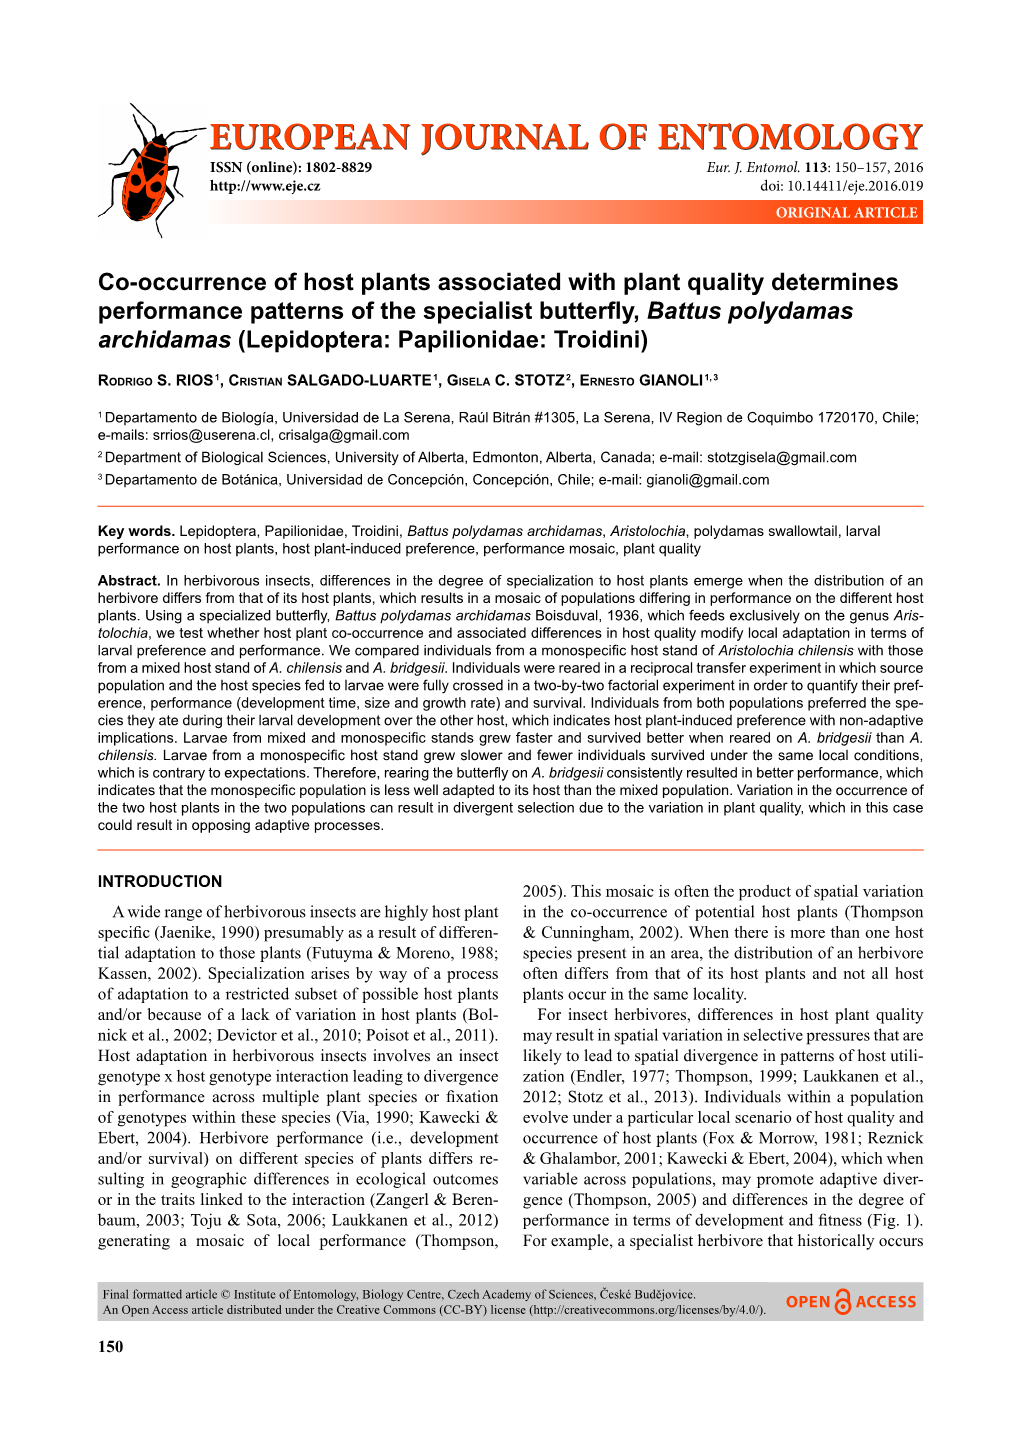 Co-Occurrence of Host Plants Associated with Plant Quality